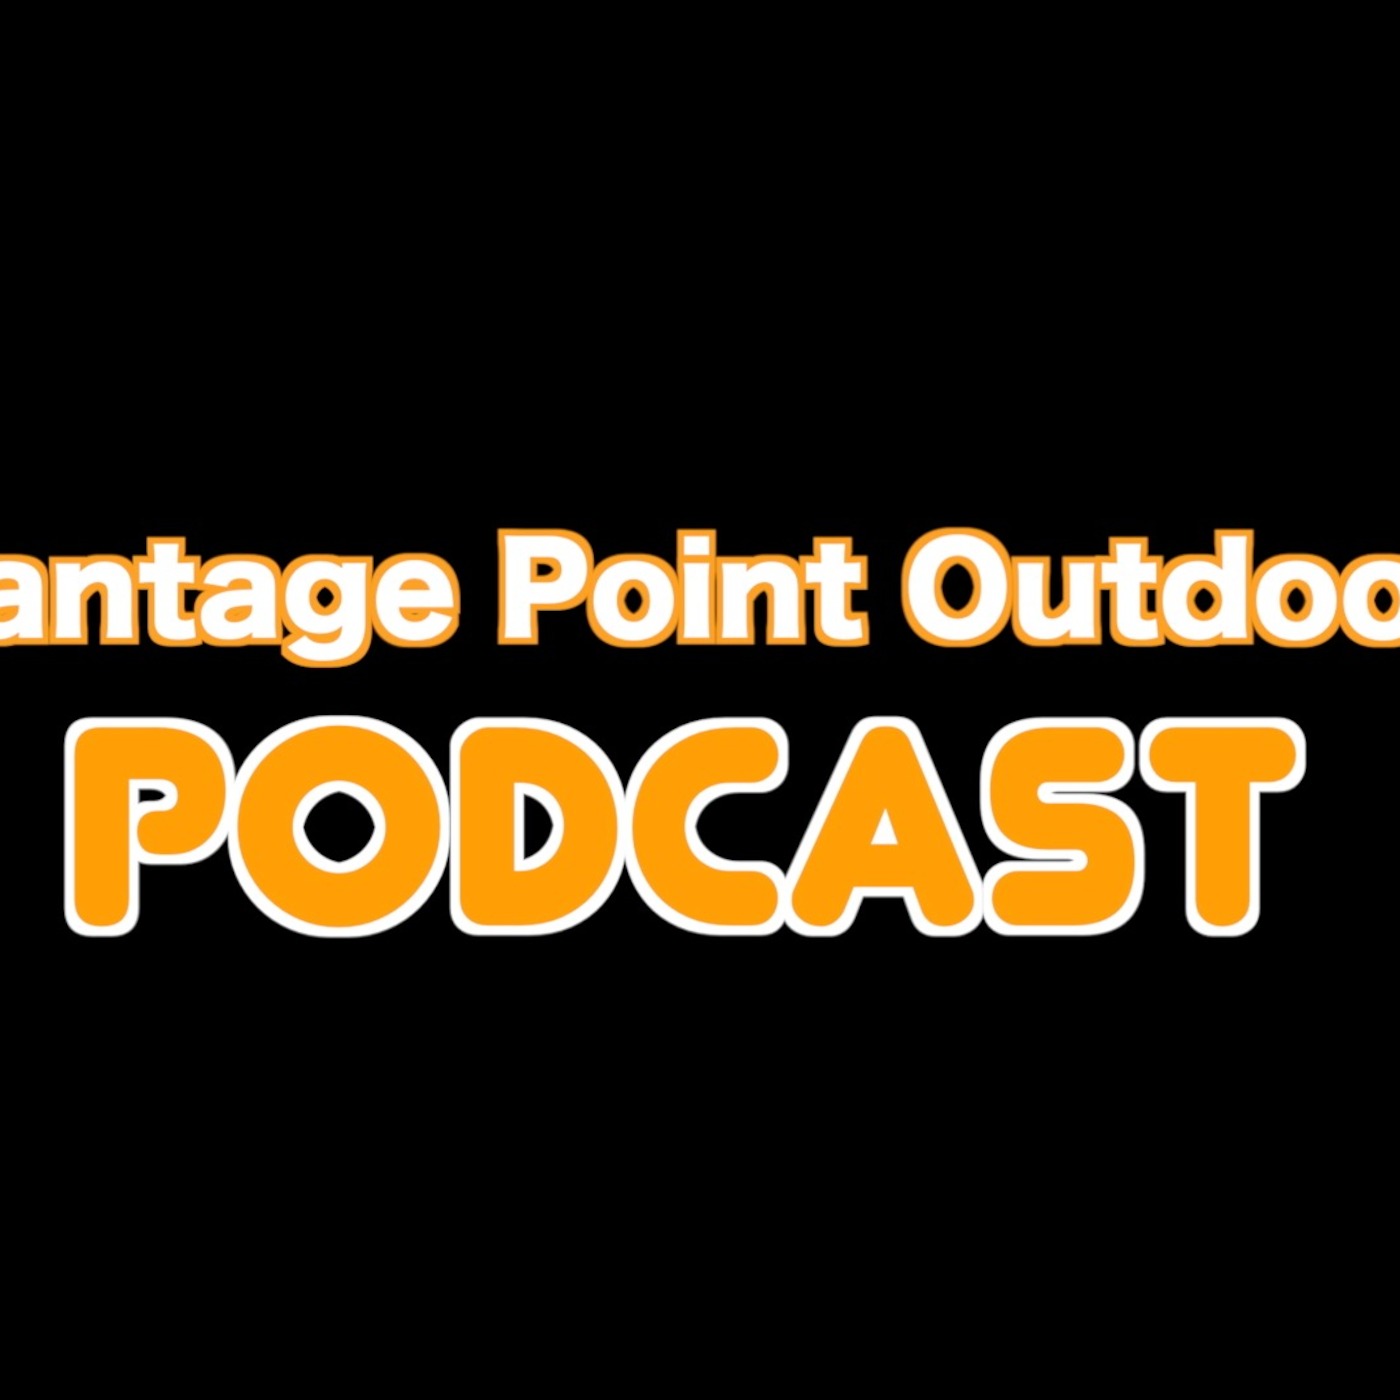 "The Vantage Point Outdoors  Podcast"